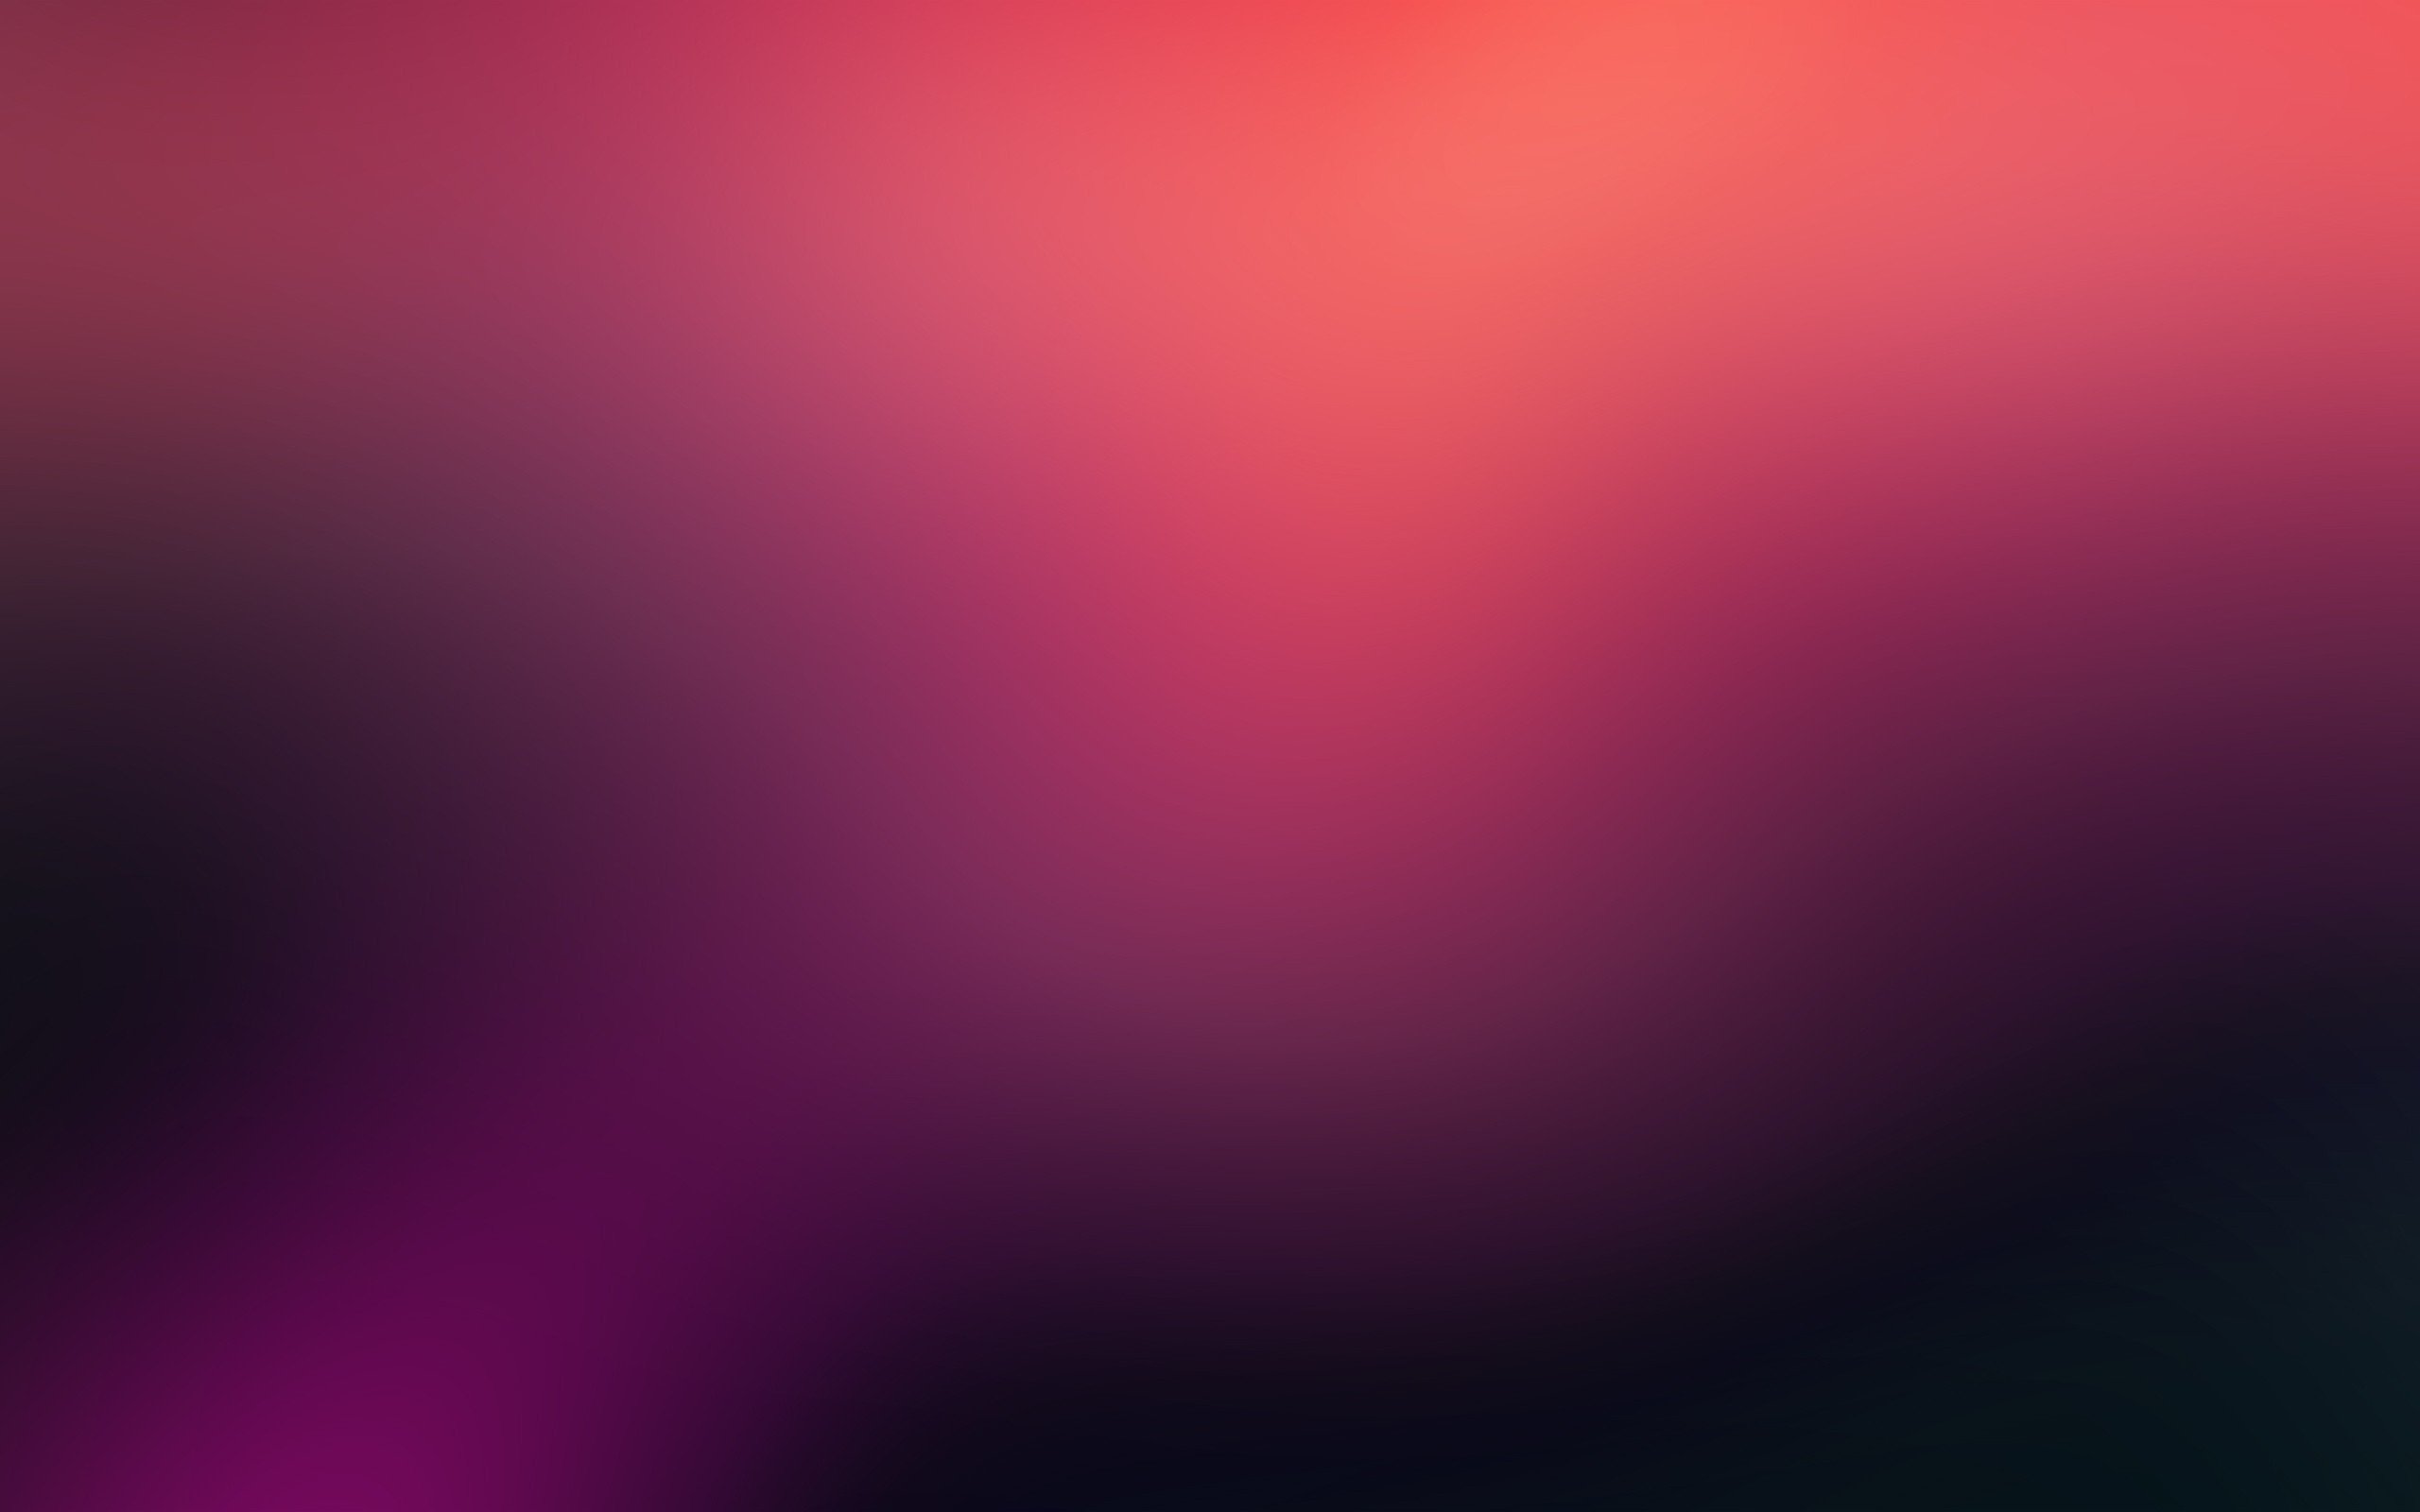 gradient, Blurred Wallpapers HD / Desktop and Mobile Backgrounds